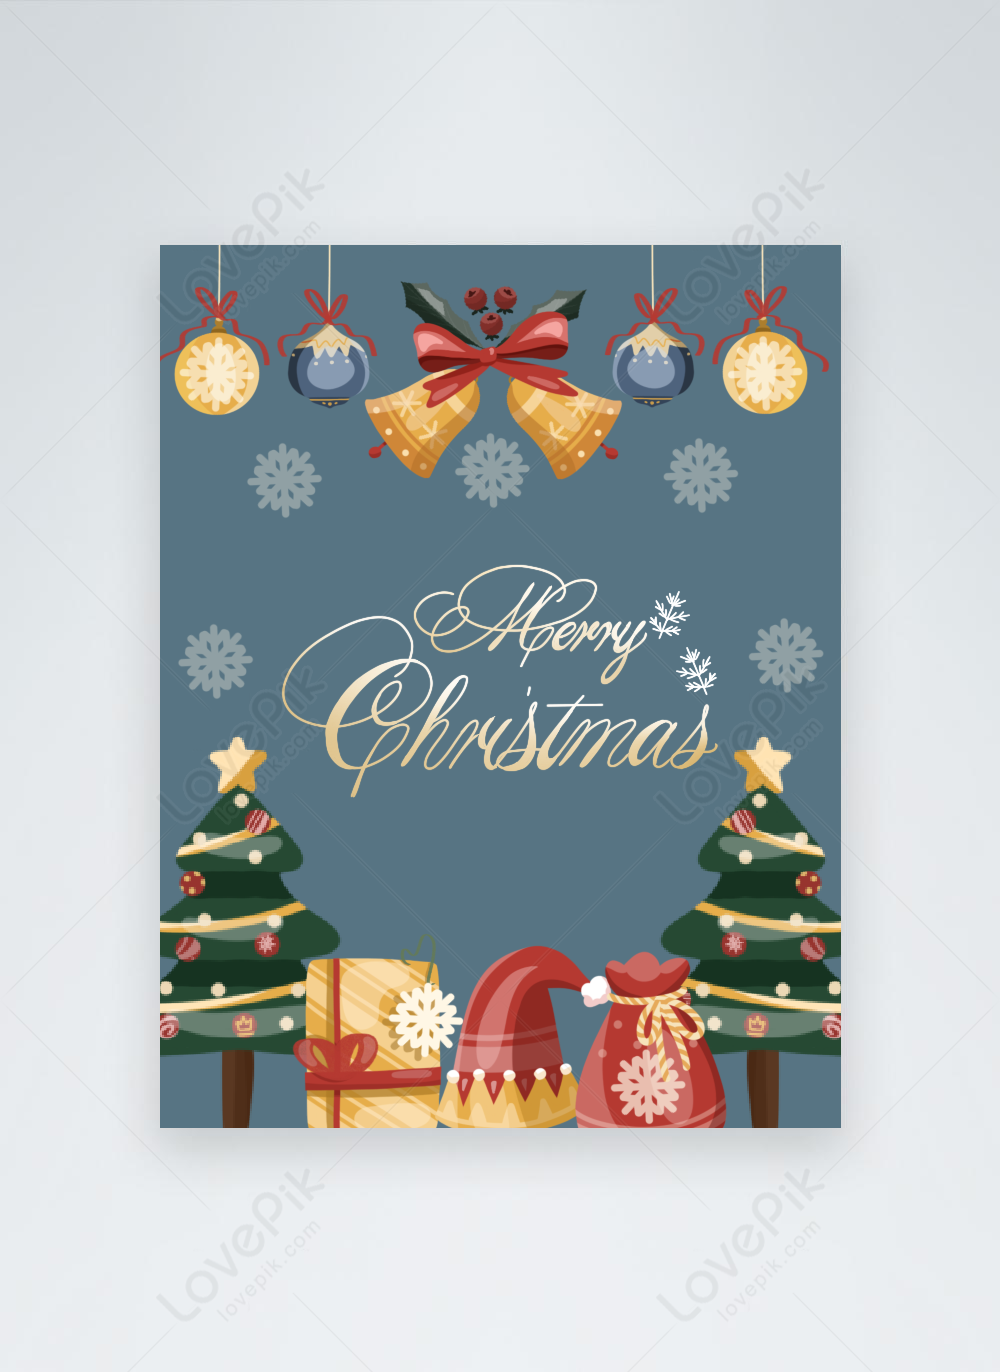 Simple And Cute Christmas Day Card Template Image Picture Free Download 465220213 Lovepik Com